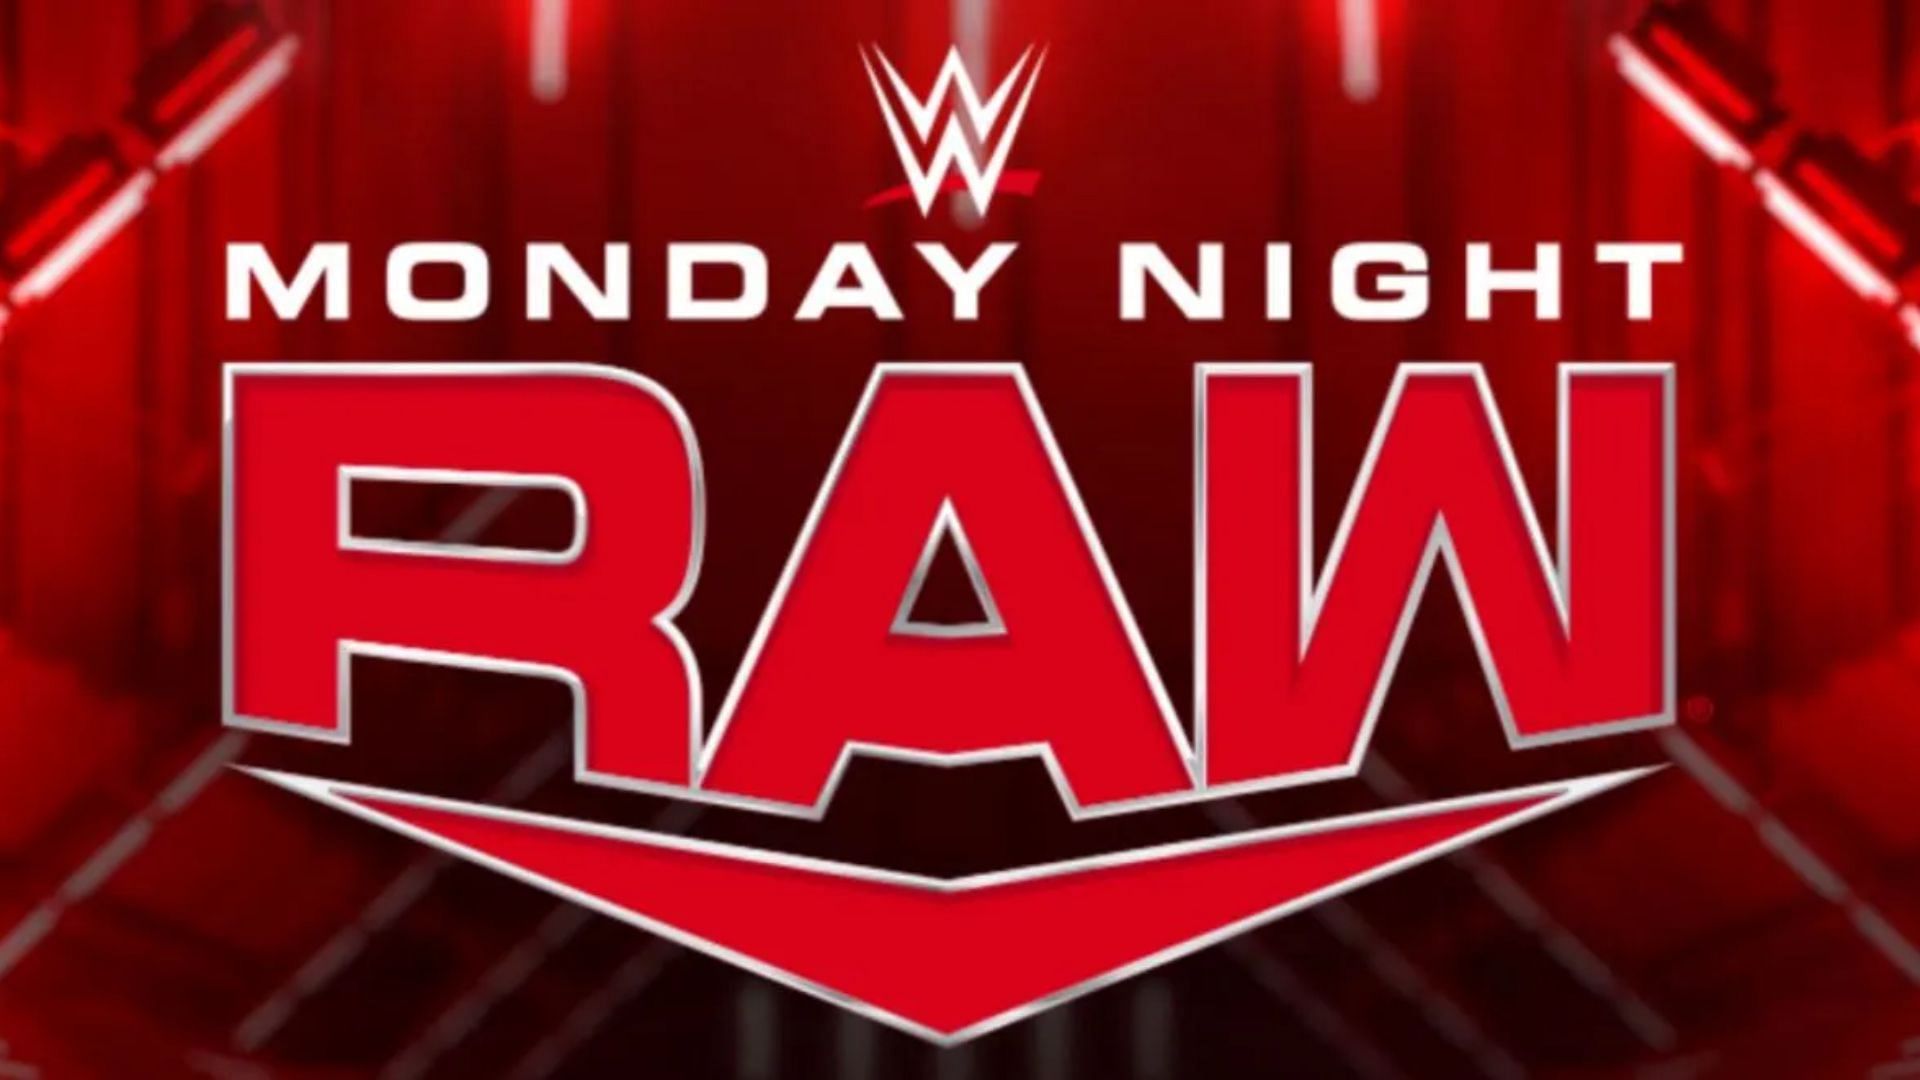 Several superstars on Monday Night RAW have benefitted from being featured heavily in recent times without a World Champion